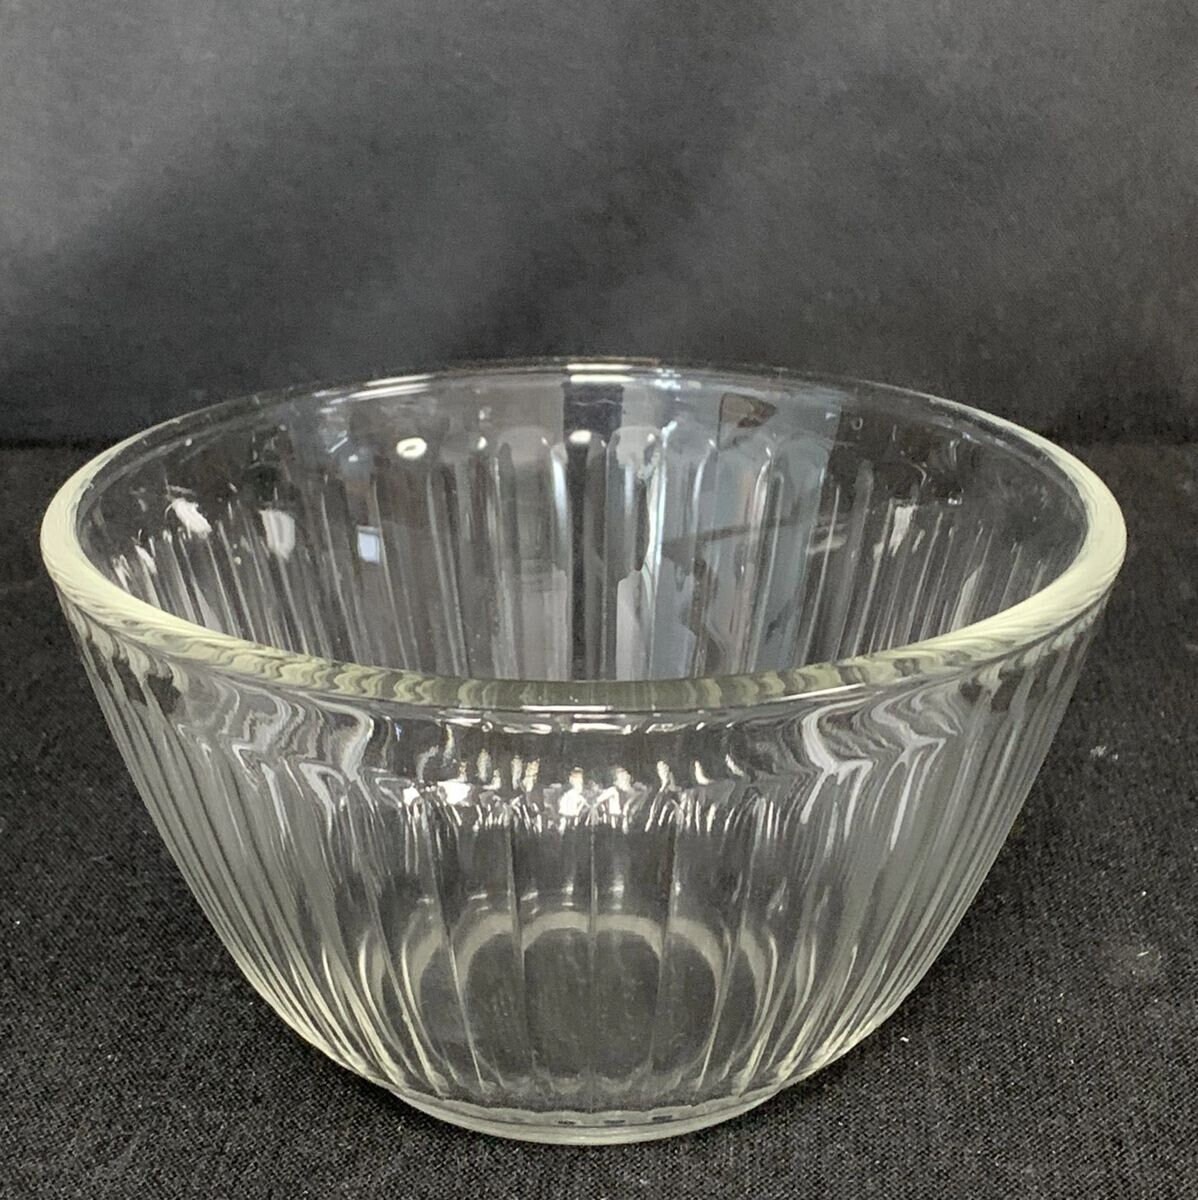 VTG Pyrex Clear Glass Ribbed Mixing Bowl 3 Cup #7401-S Farmhouse Kitchen  USA